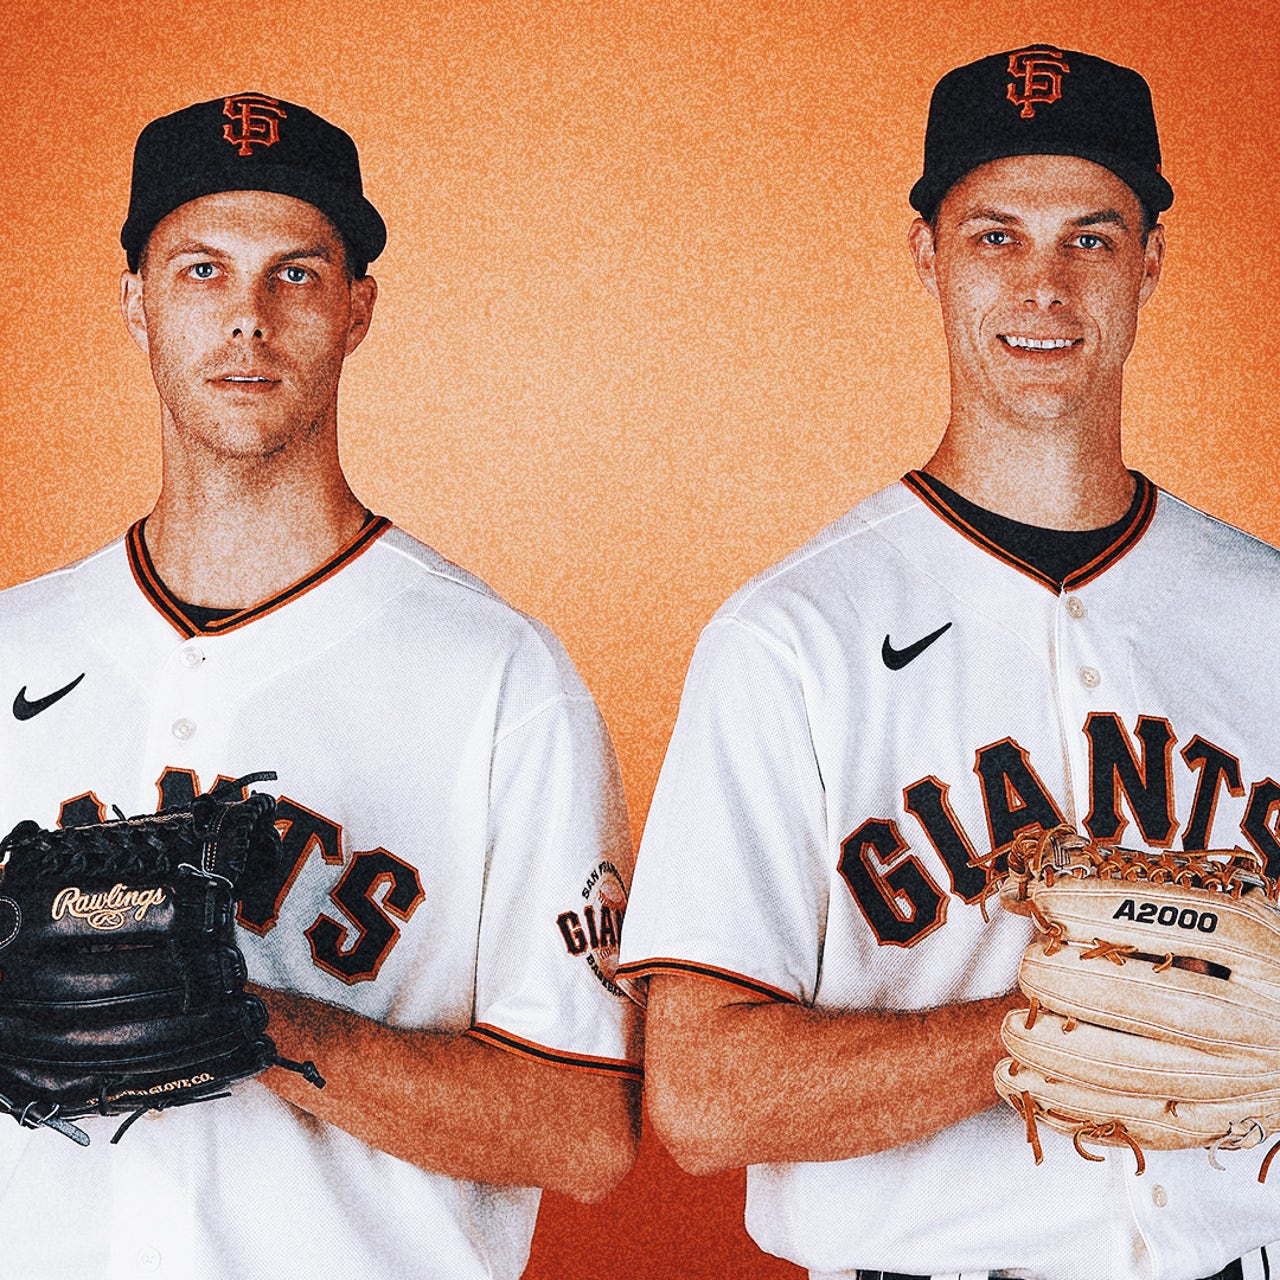 Giants twins Taylor and Tyler Rogers having nearly identical MLB seasons